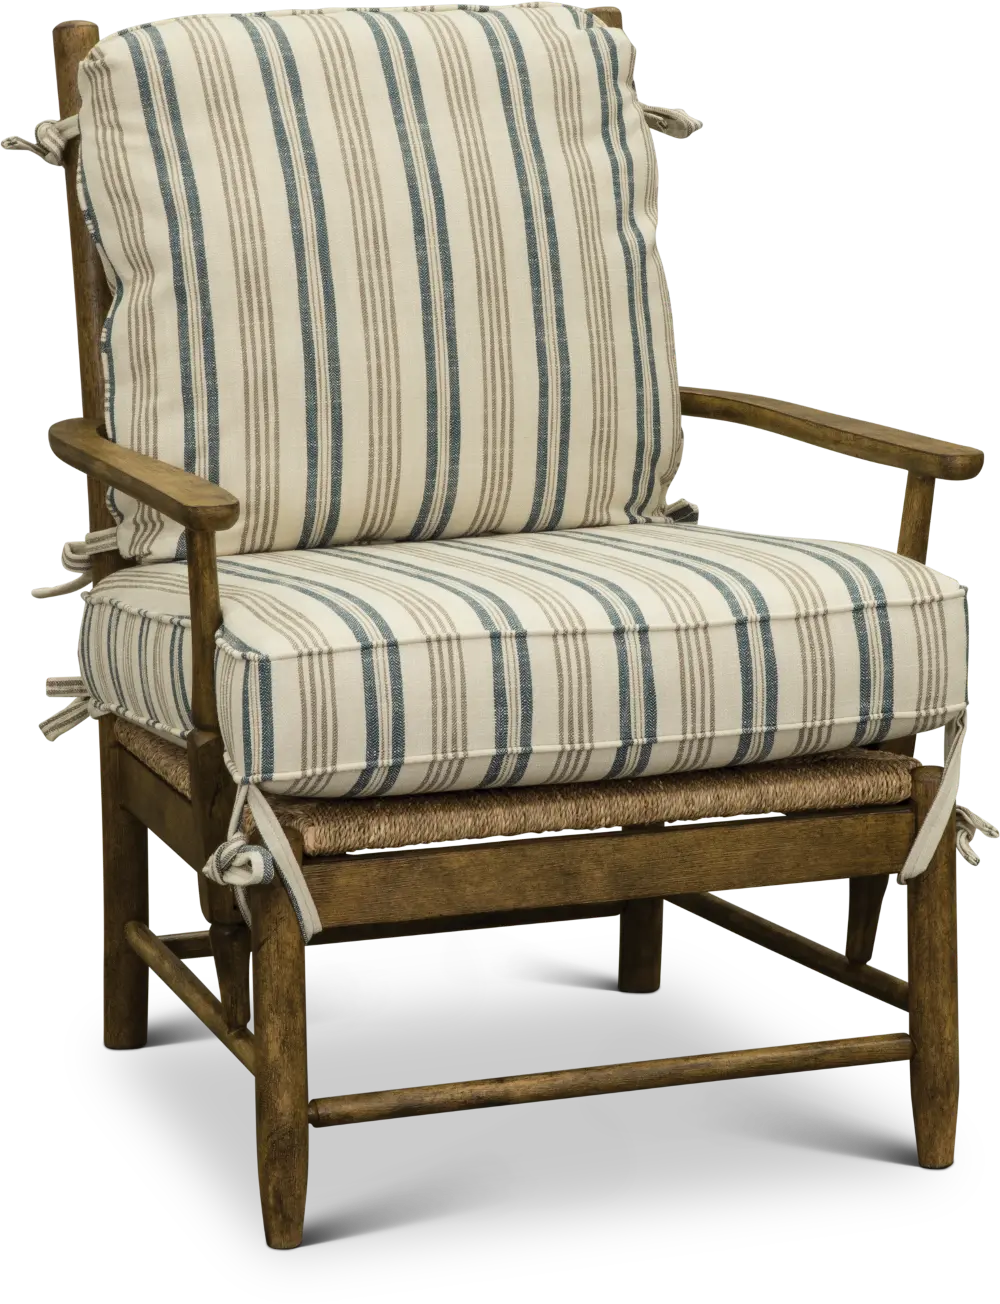 Cream, Tan and Blue Striped Accent Chair - Riverbank-1